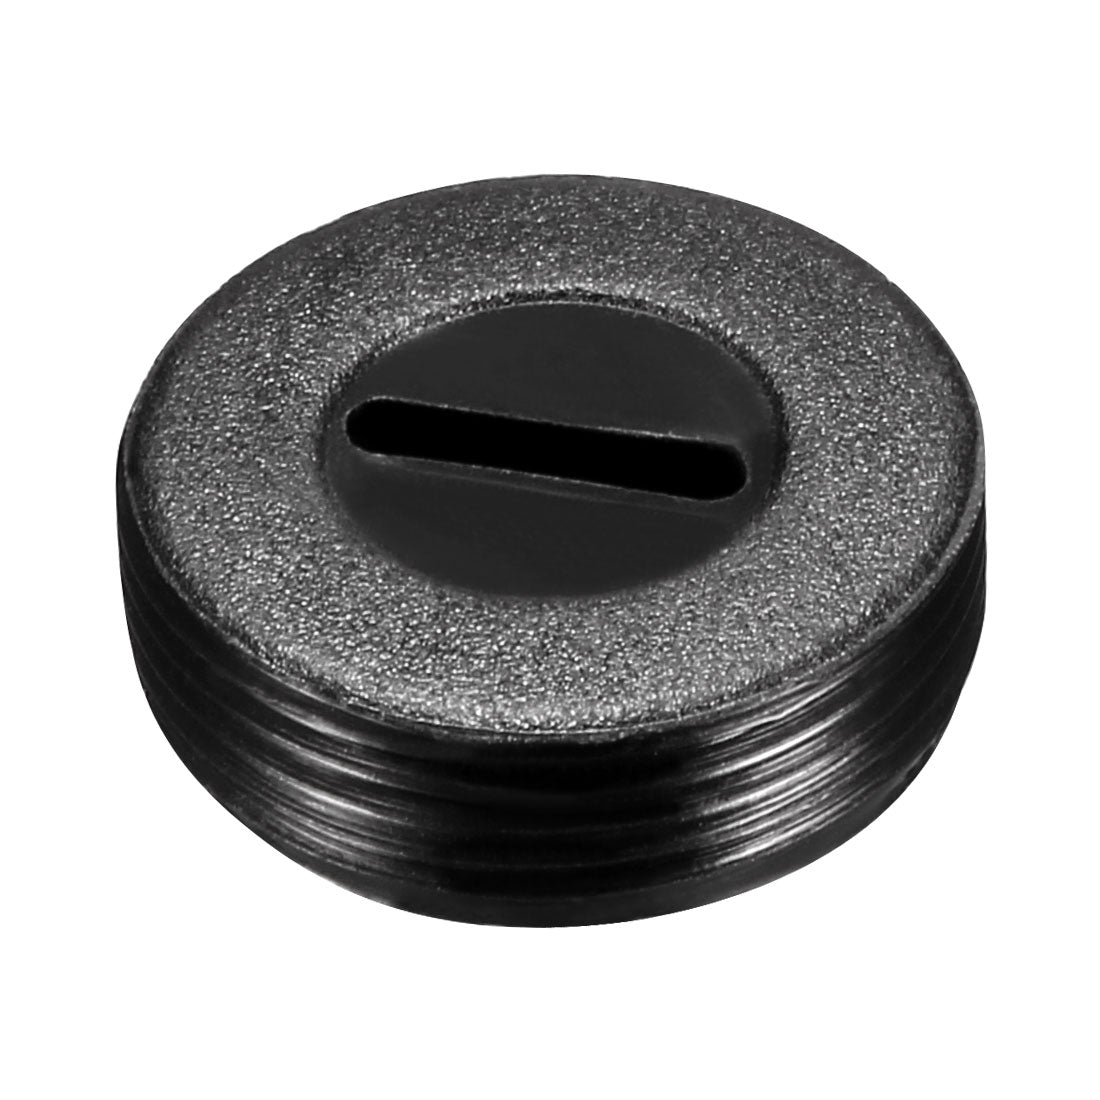 uxcell Uxcell Carbon Brush Holder Caps 18mm O.D. 6.3mm Thickness Motor Brush Cover Plastic Fitting Thread Black 2pcs